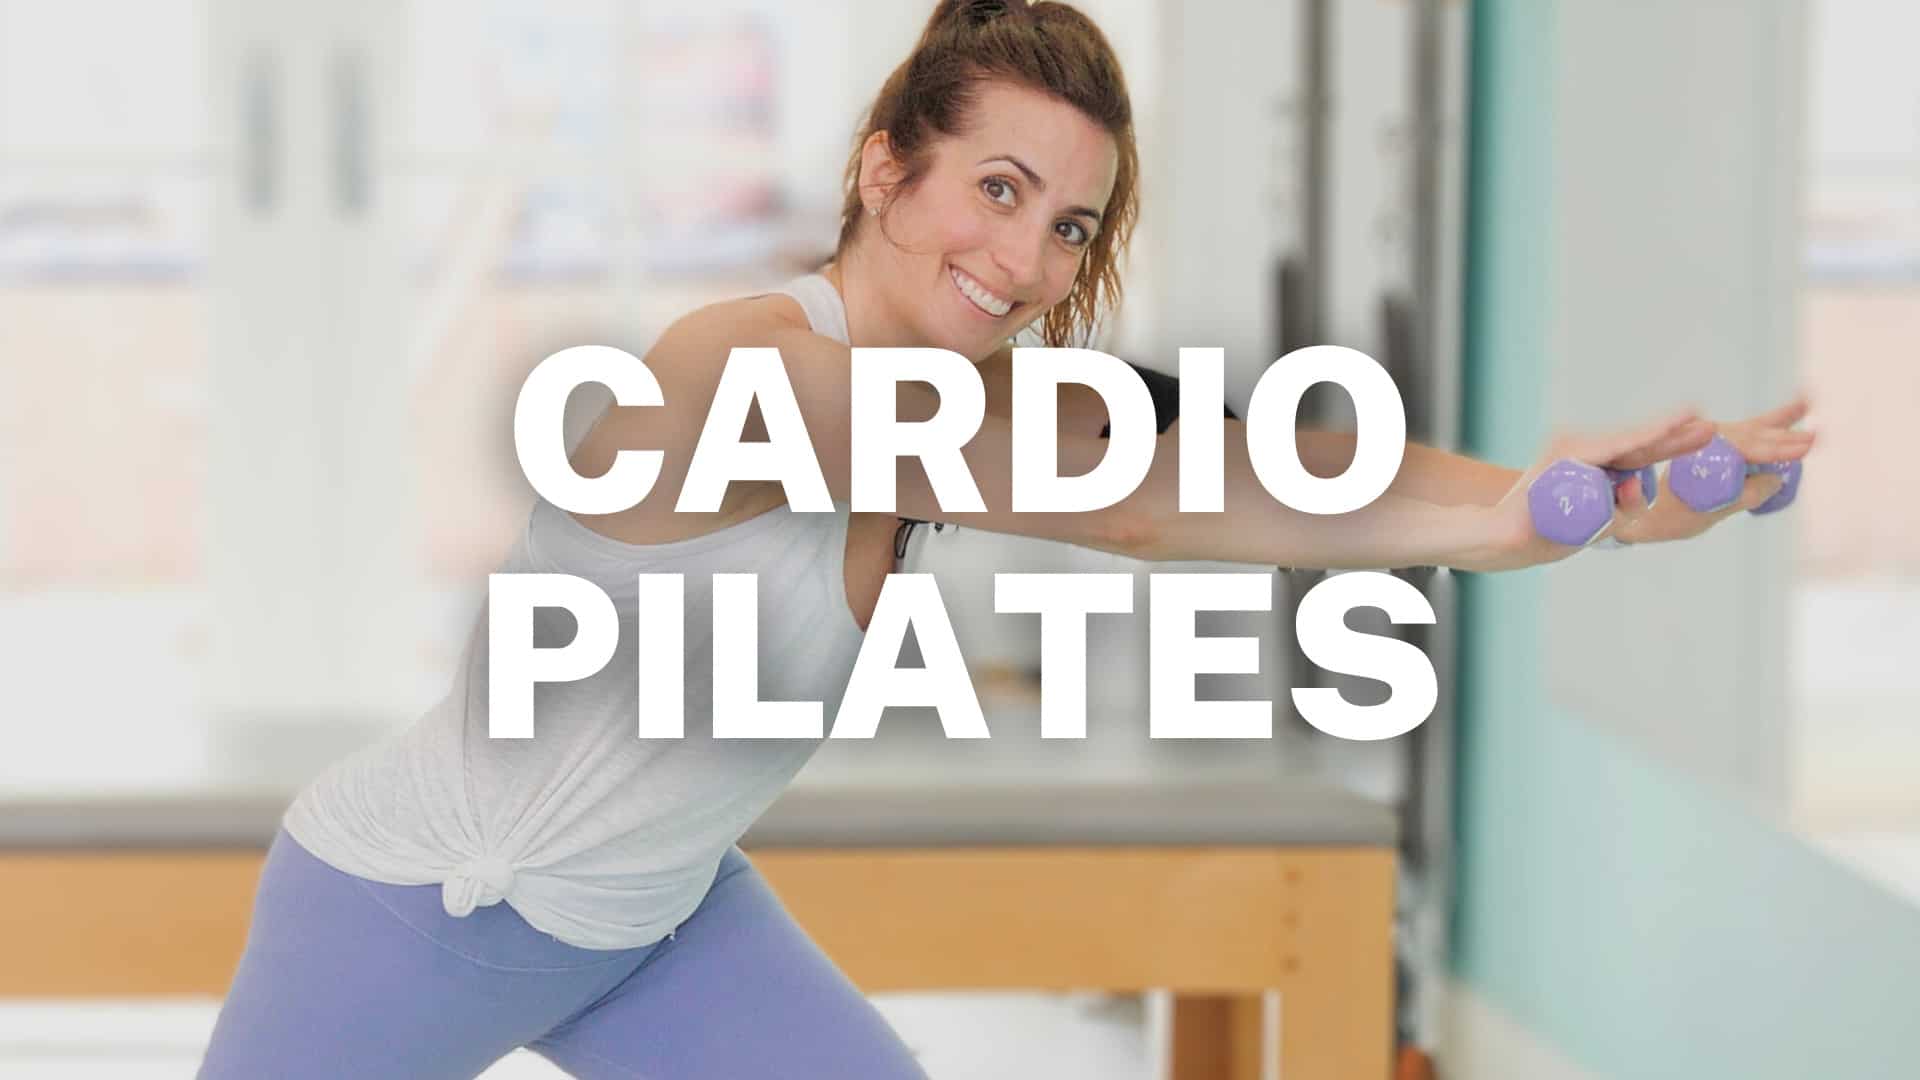 Cardio Pilates Program with Carrie Russo